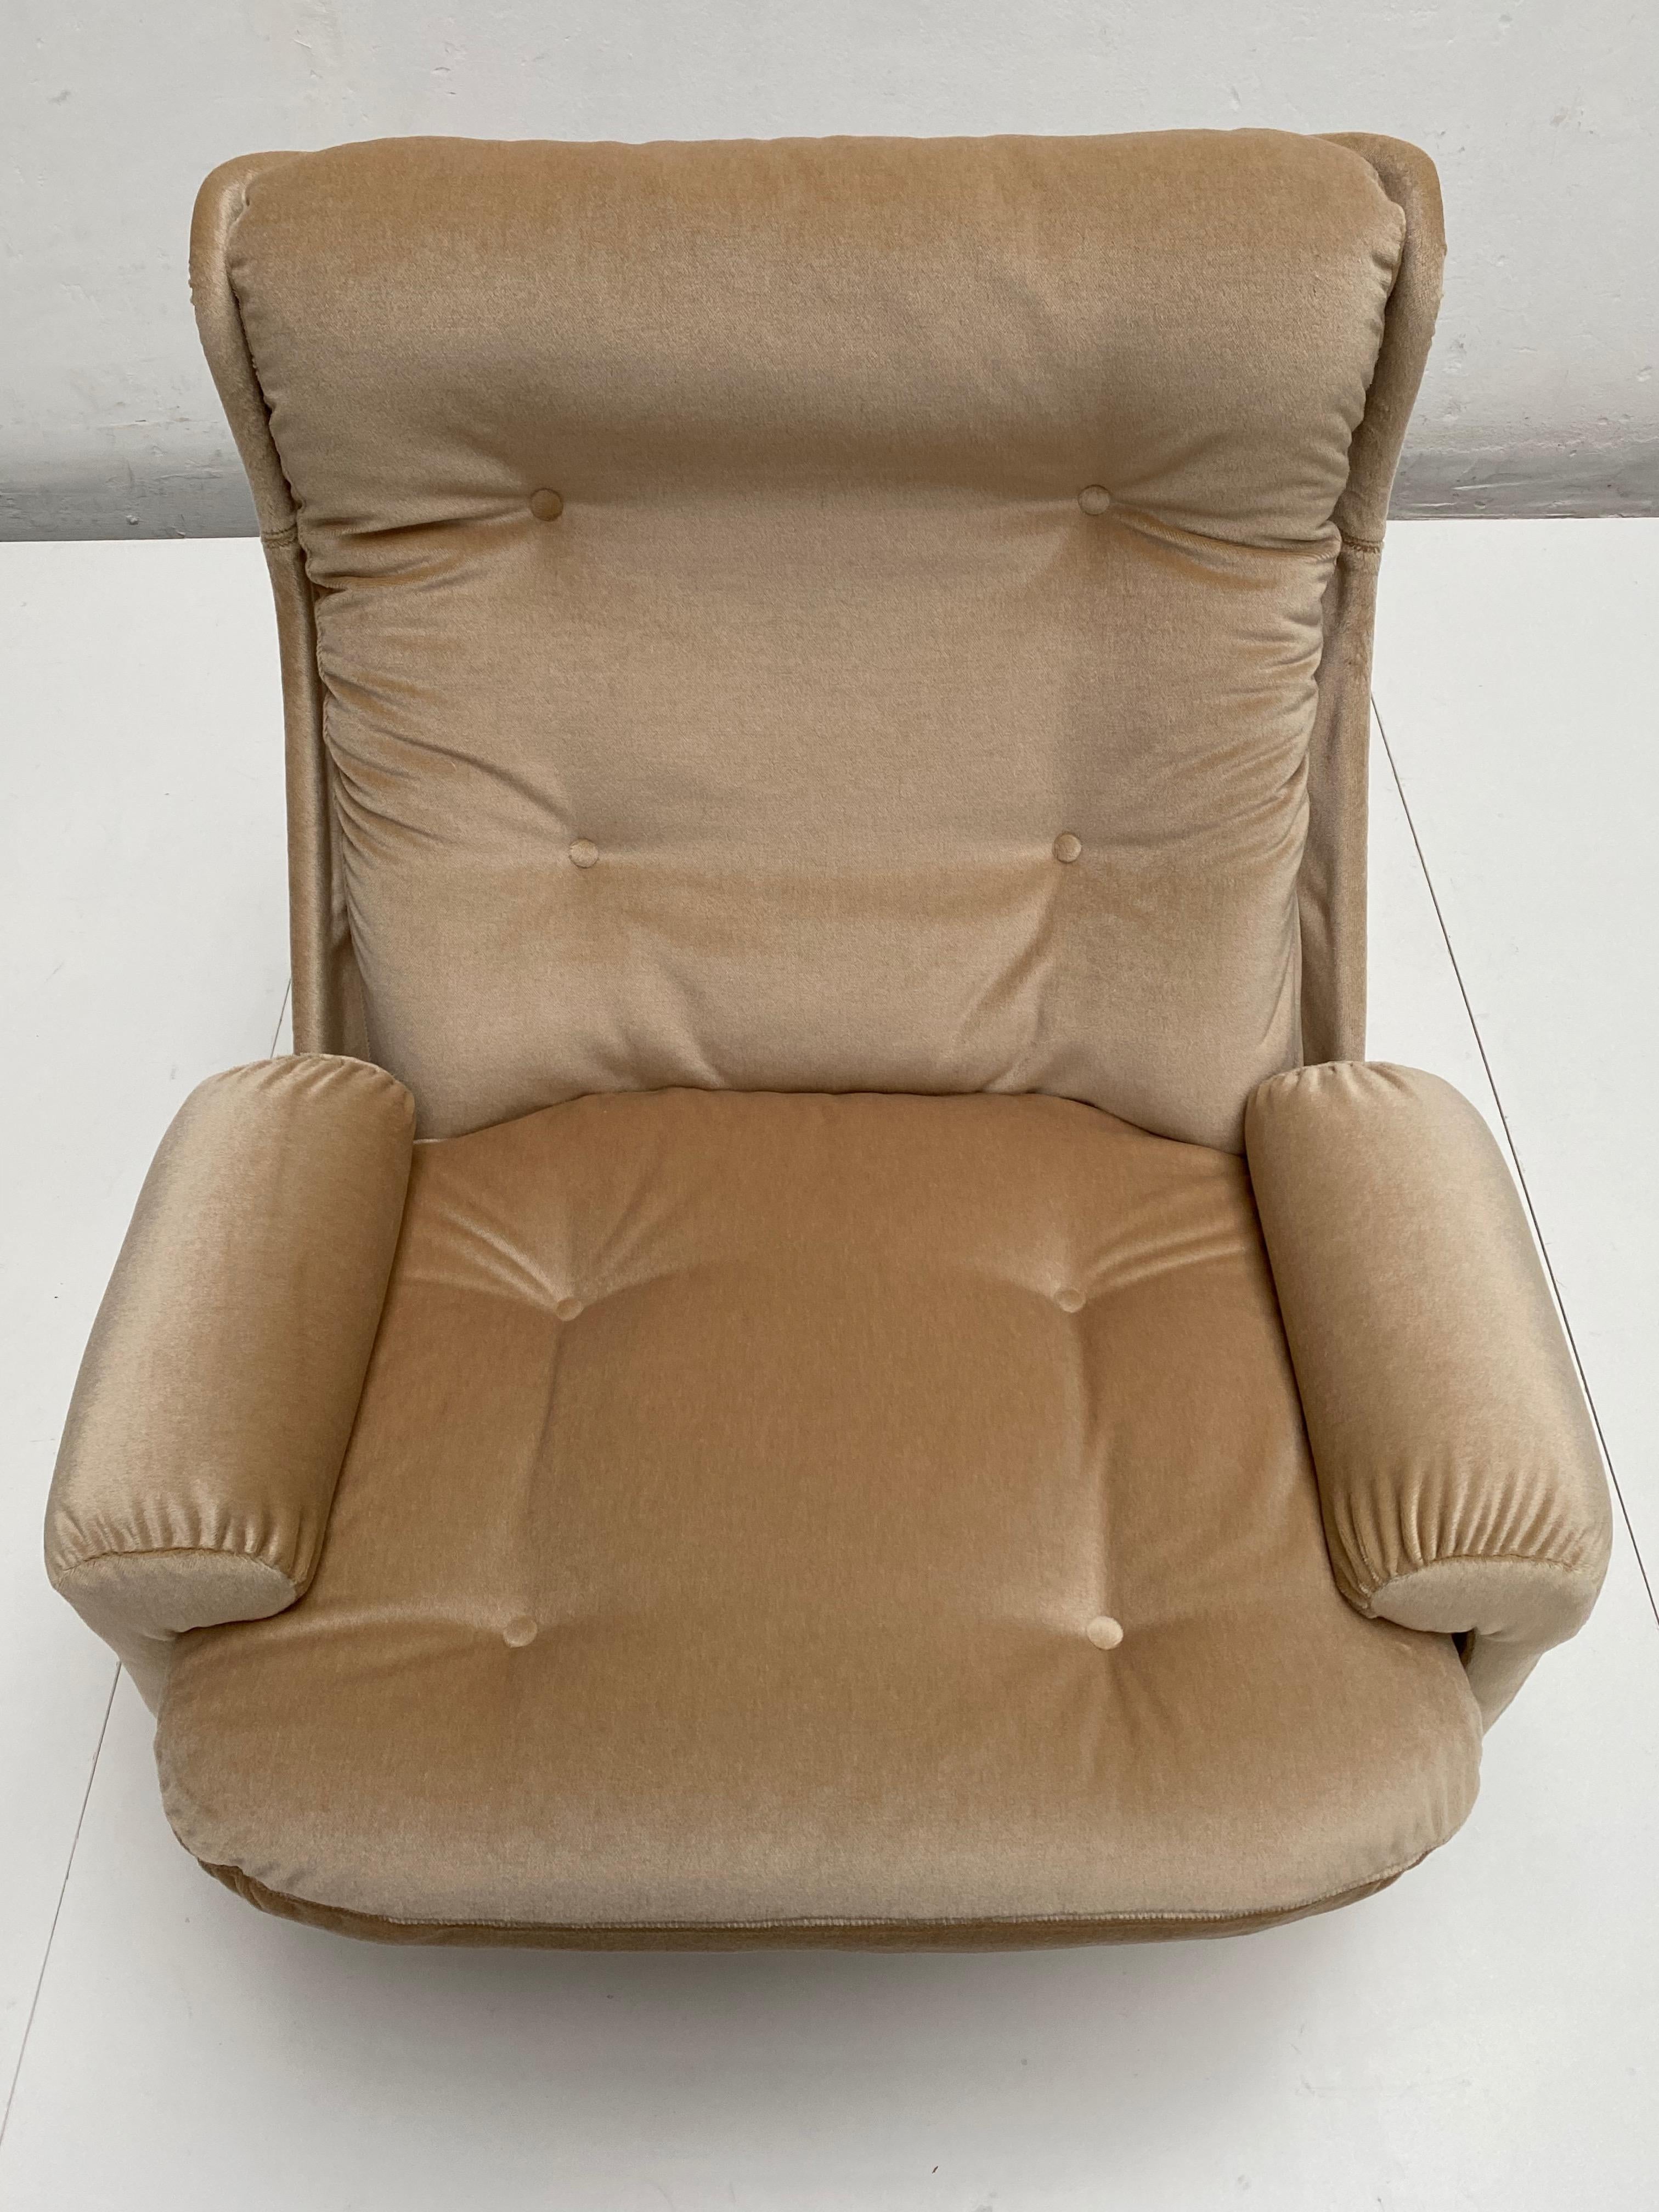 French Space Age Mohair “Orchidée” Lounge Chairs Michel Cadestin, Airborne, France 1968 For Sale